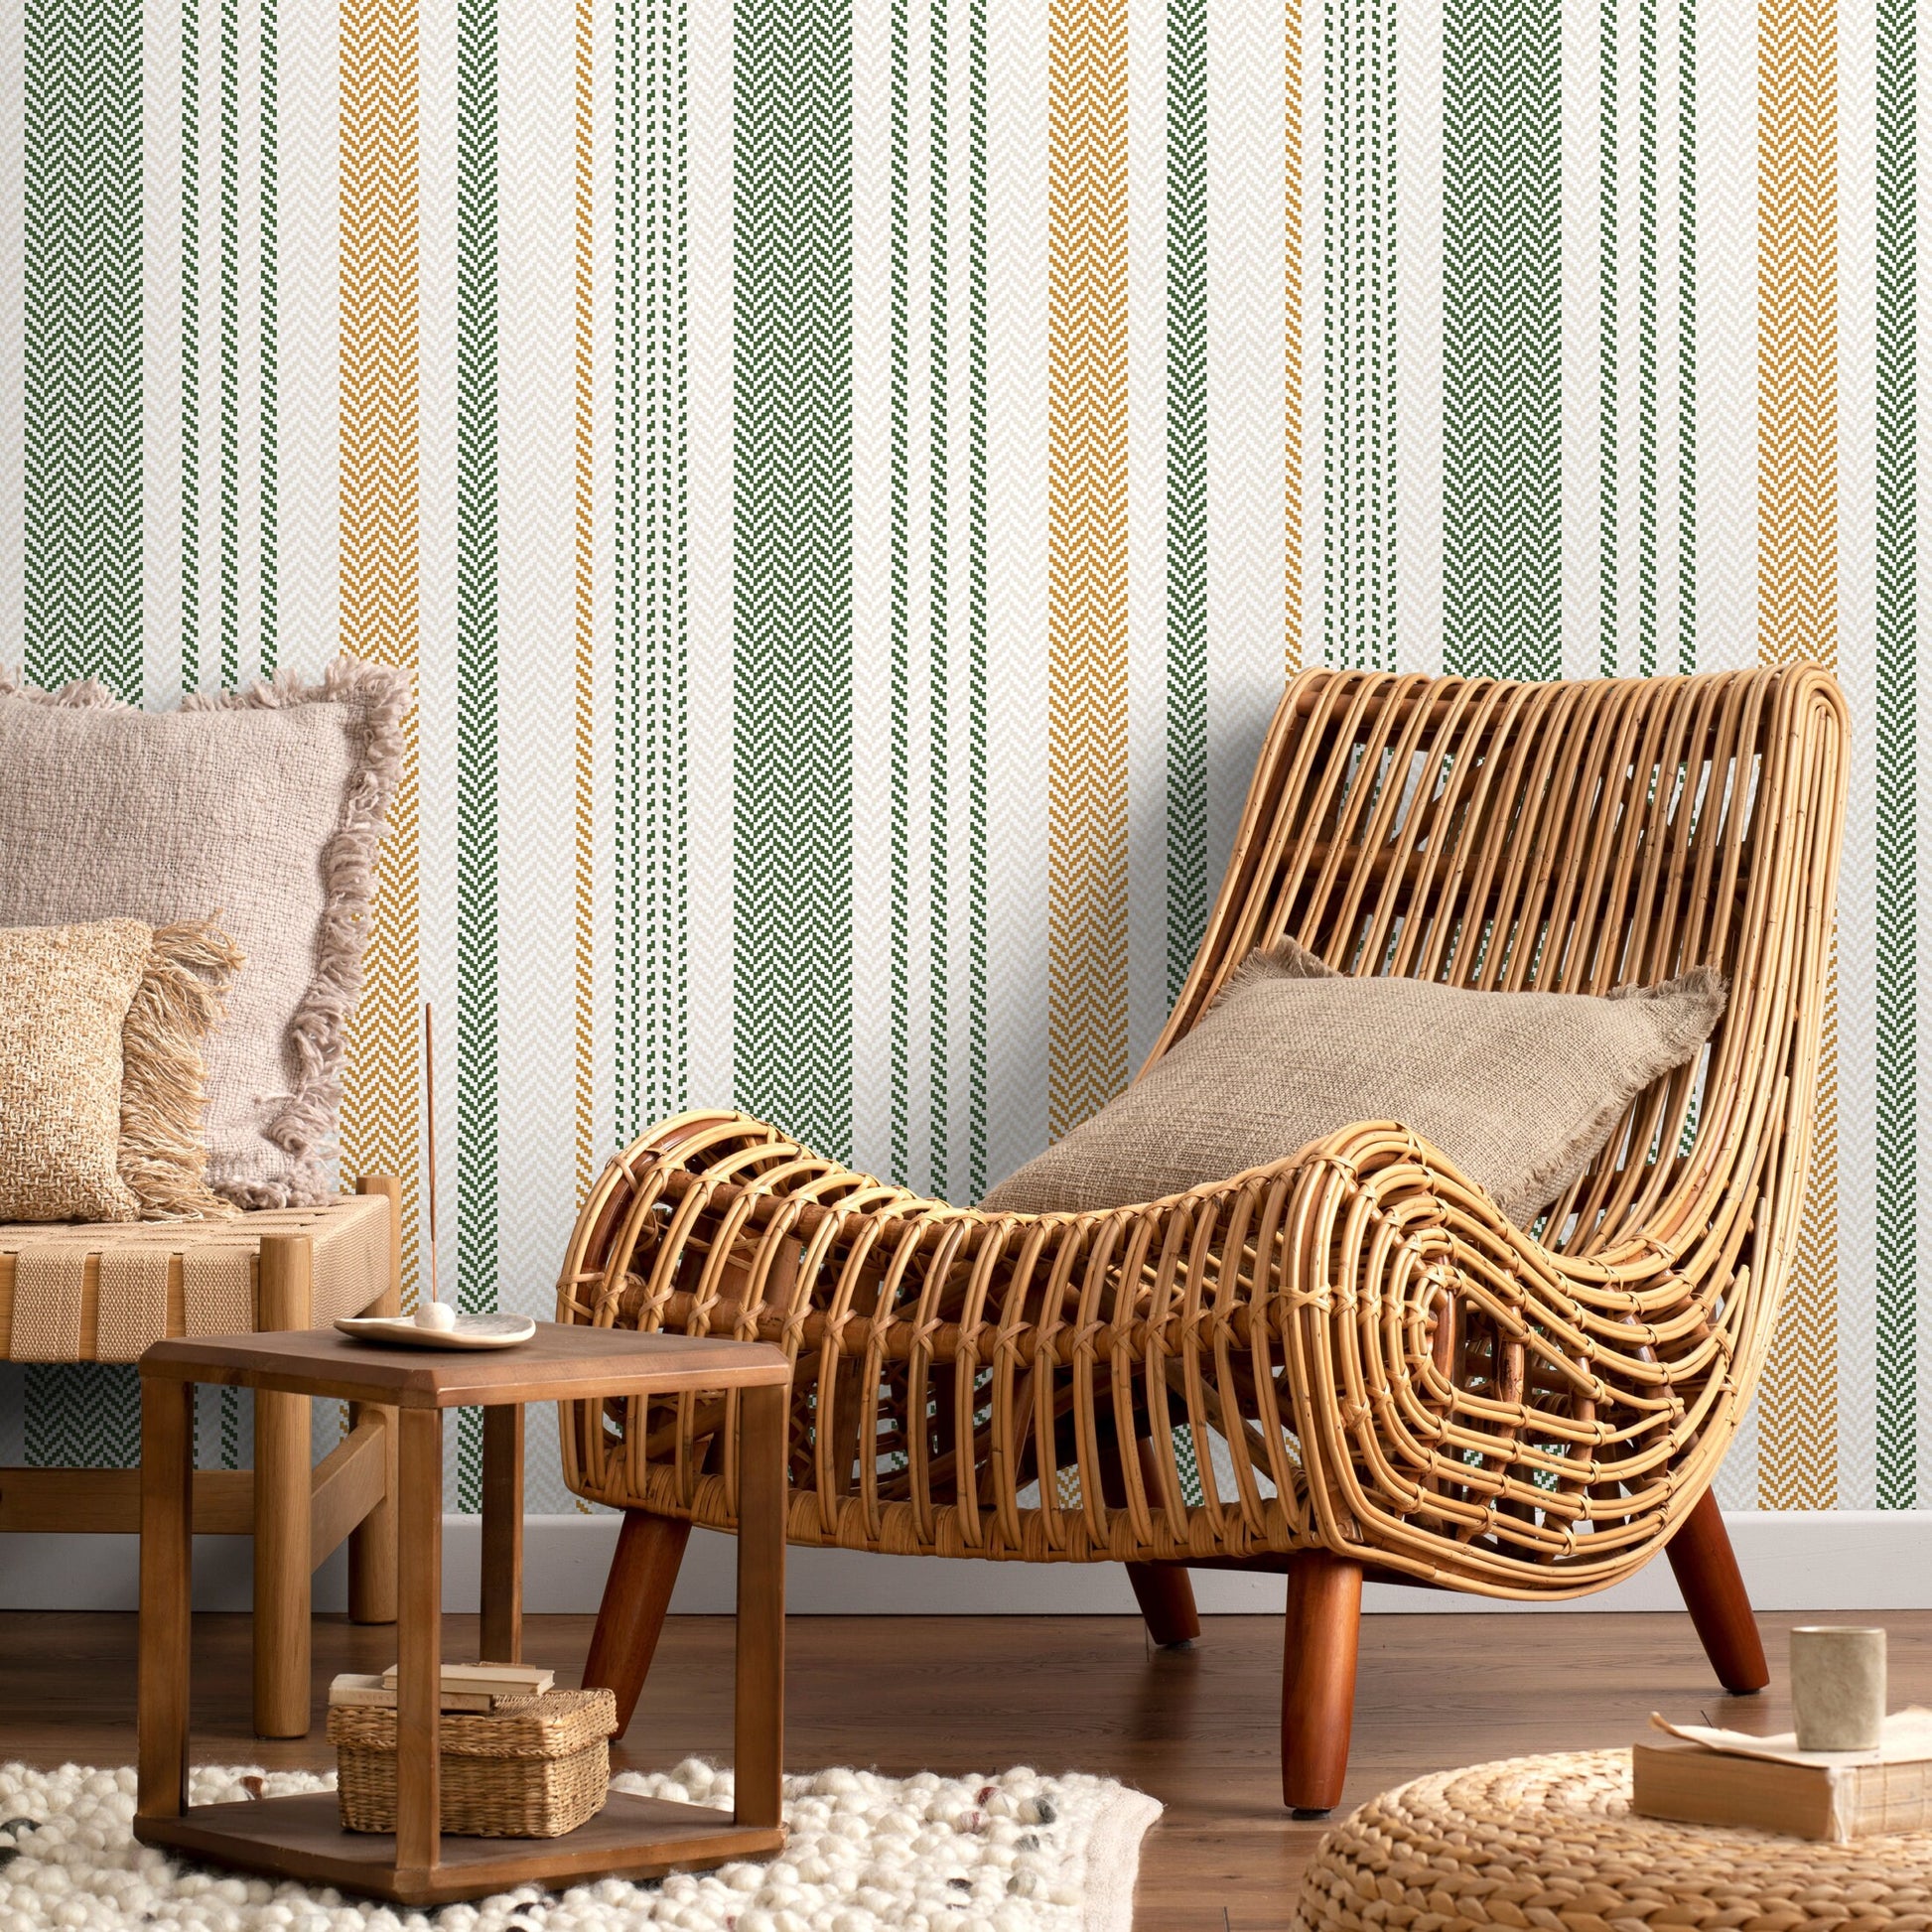 Farmhouse Striped Wallpaper Chevron Wallpaper Peel and Stick and Traditional Wallpaper - D804